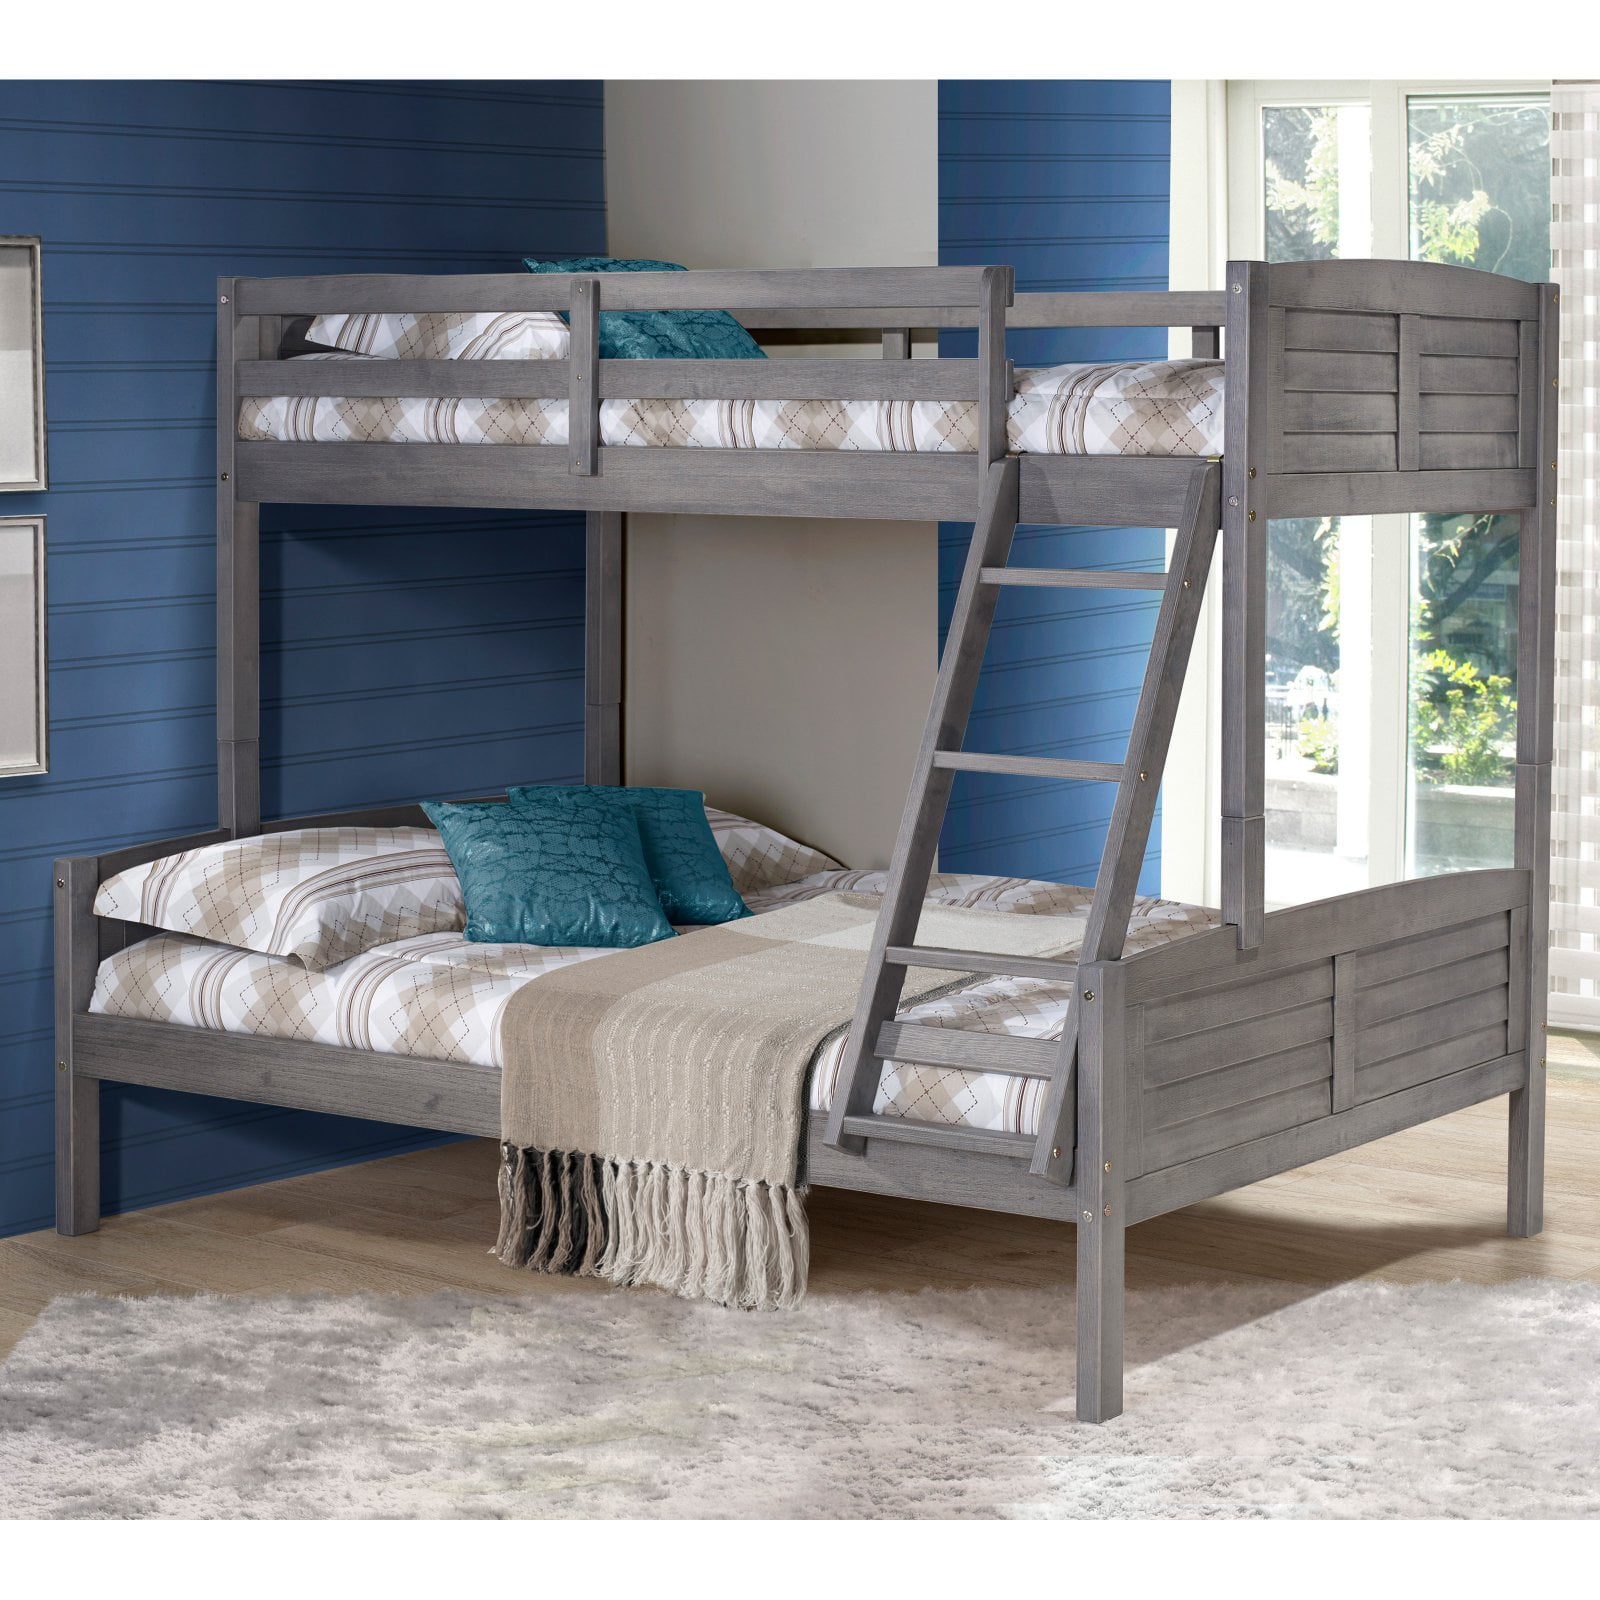 Donco Kids Louver Wood Bunk Bed Twin, Full Twin Bunk Bed Wood